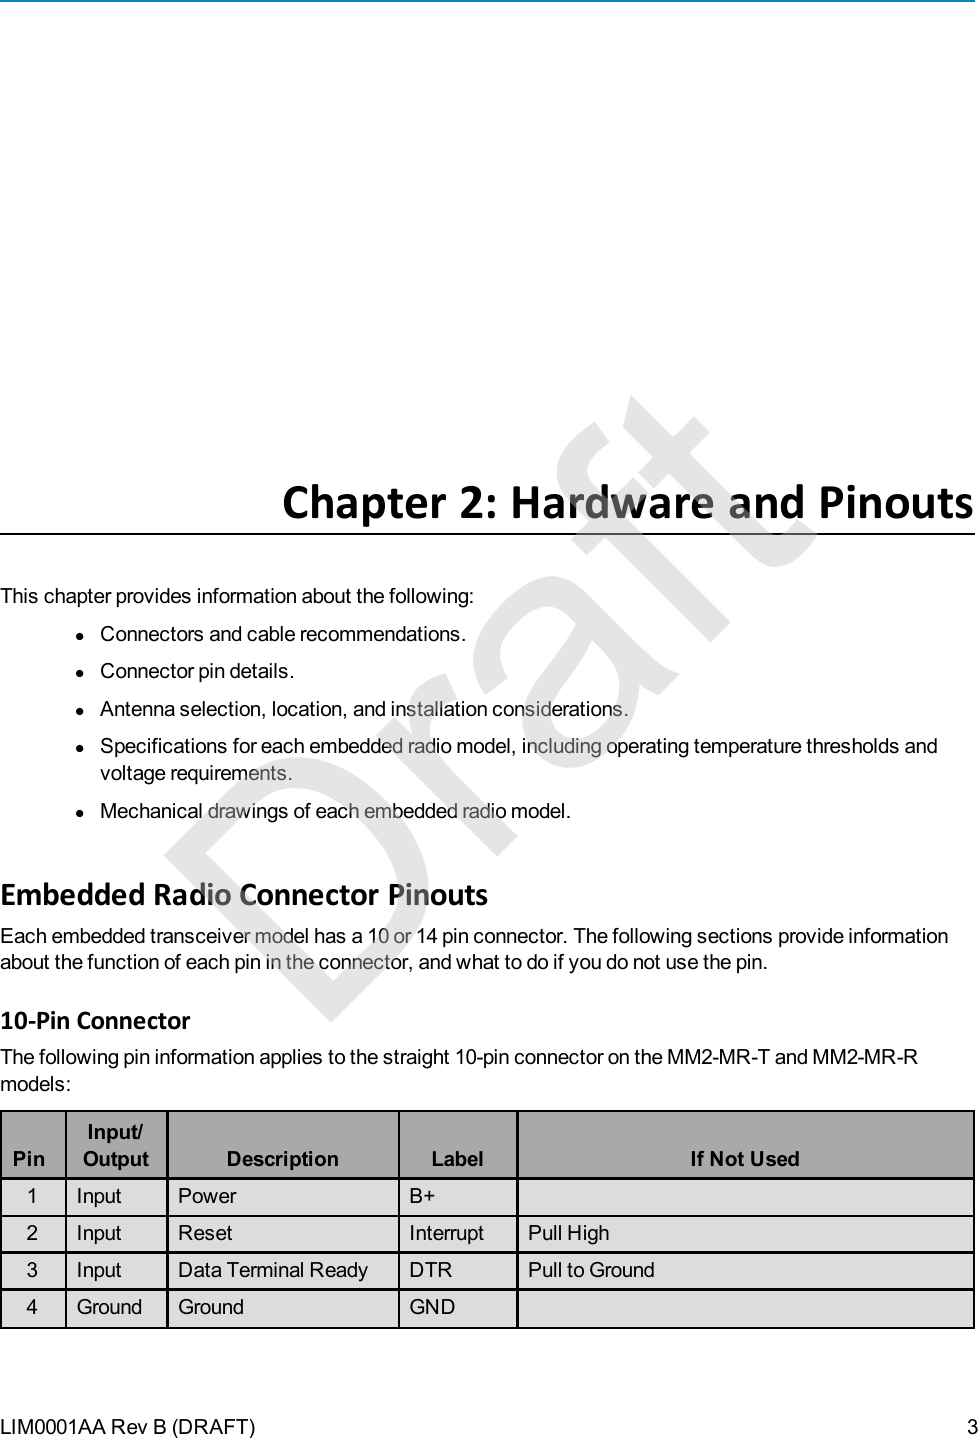 LIM0001AA Rev B (DRAFT)Chapter 2: Hardware and PinoutsThis chapter provides information about the following:lConnectors and cable recommendations.lConnector pin details.lAntenna selection, location, and installation considerations.lSpecifications for each embedded radio model, including operating temperature thresholds andvoltage requirements.lMechanical drawings of each embedded radio model.Embedded Radio Connector PinoutsEach embedded transceiver model has a 10 or 14 pin connector. The following sections provide informationabout the function of each pin in the connector, and what to do if you do not use the pin.10-Pin ConnectorThe following pin information applies to the straight 10-pin connector on the MM2-MR-T and MM2-MR-Rmodels:PinInput/Output Description Label If Not Used1 Input Power B+2 Input Reset Interrupt Pull High3 Input Data Terminal Ready DTR Pull to Ground4 Ground Ground GND3Draft